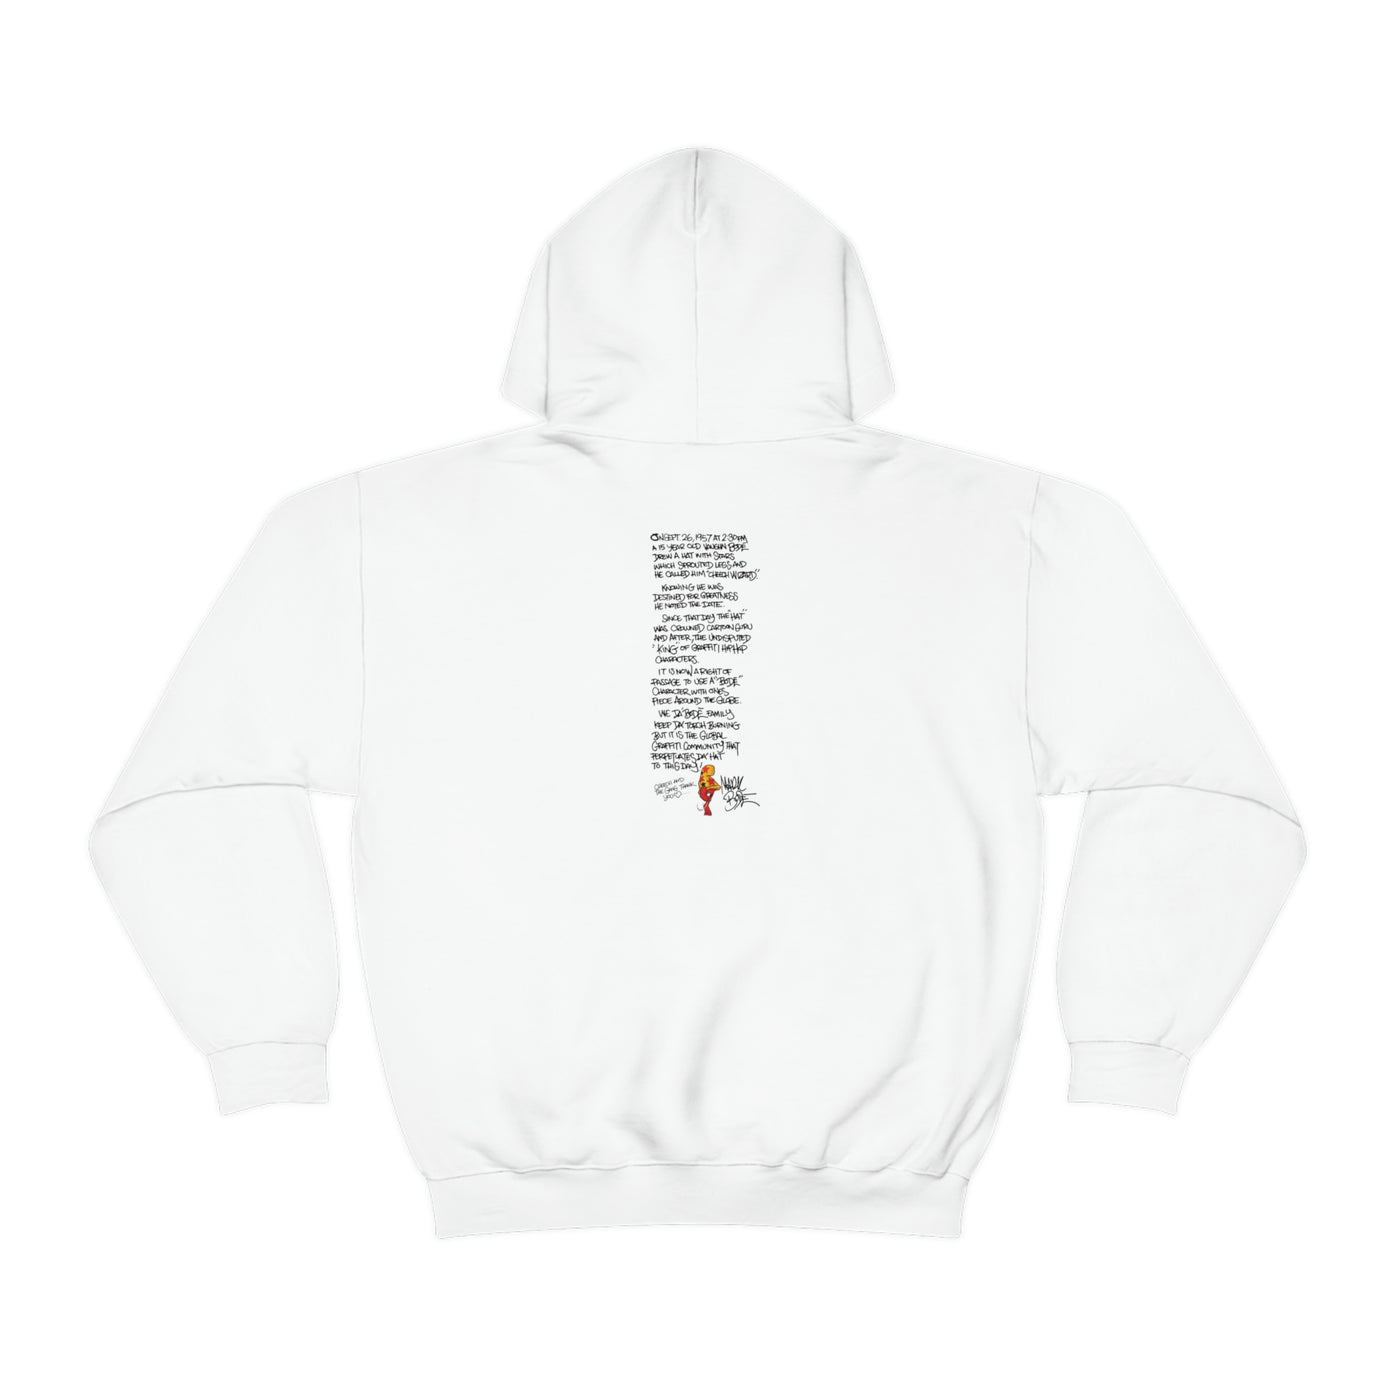 Bode X 50th Anniversary of Hip Hop Limited Edition 2-Sided Hoodie White